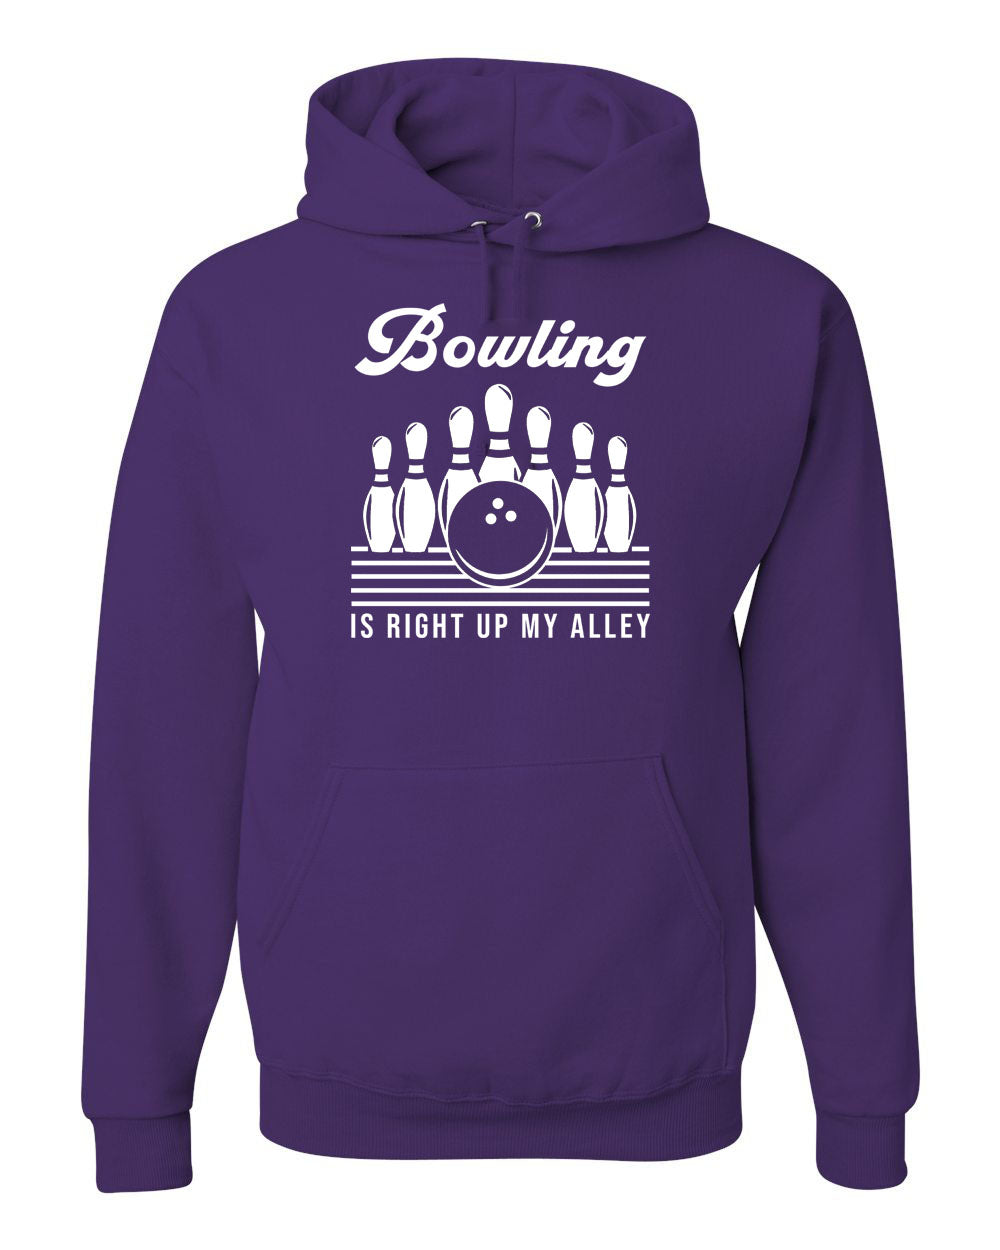 Bowling is right up my alley Hooded Sweatshirt